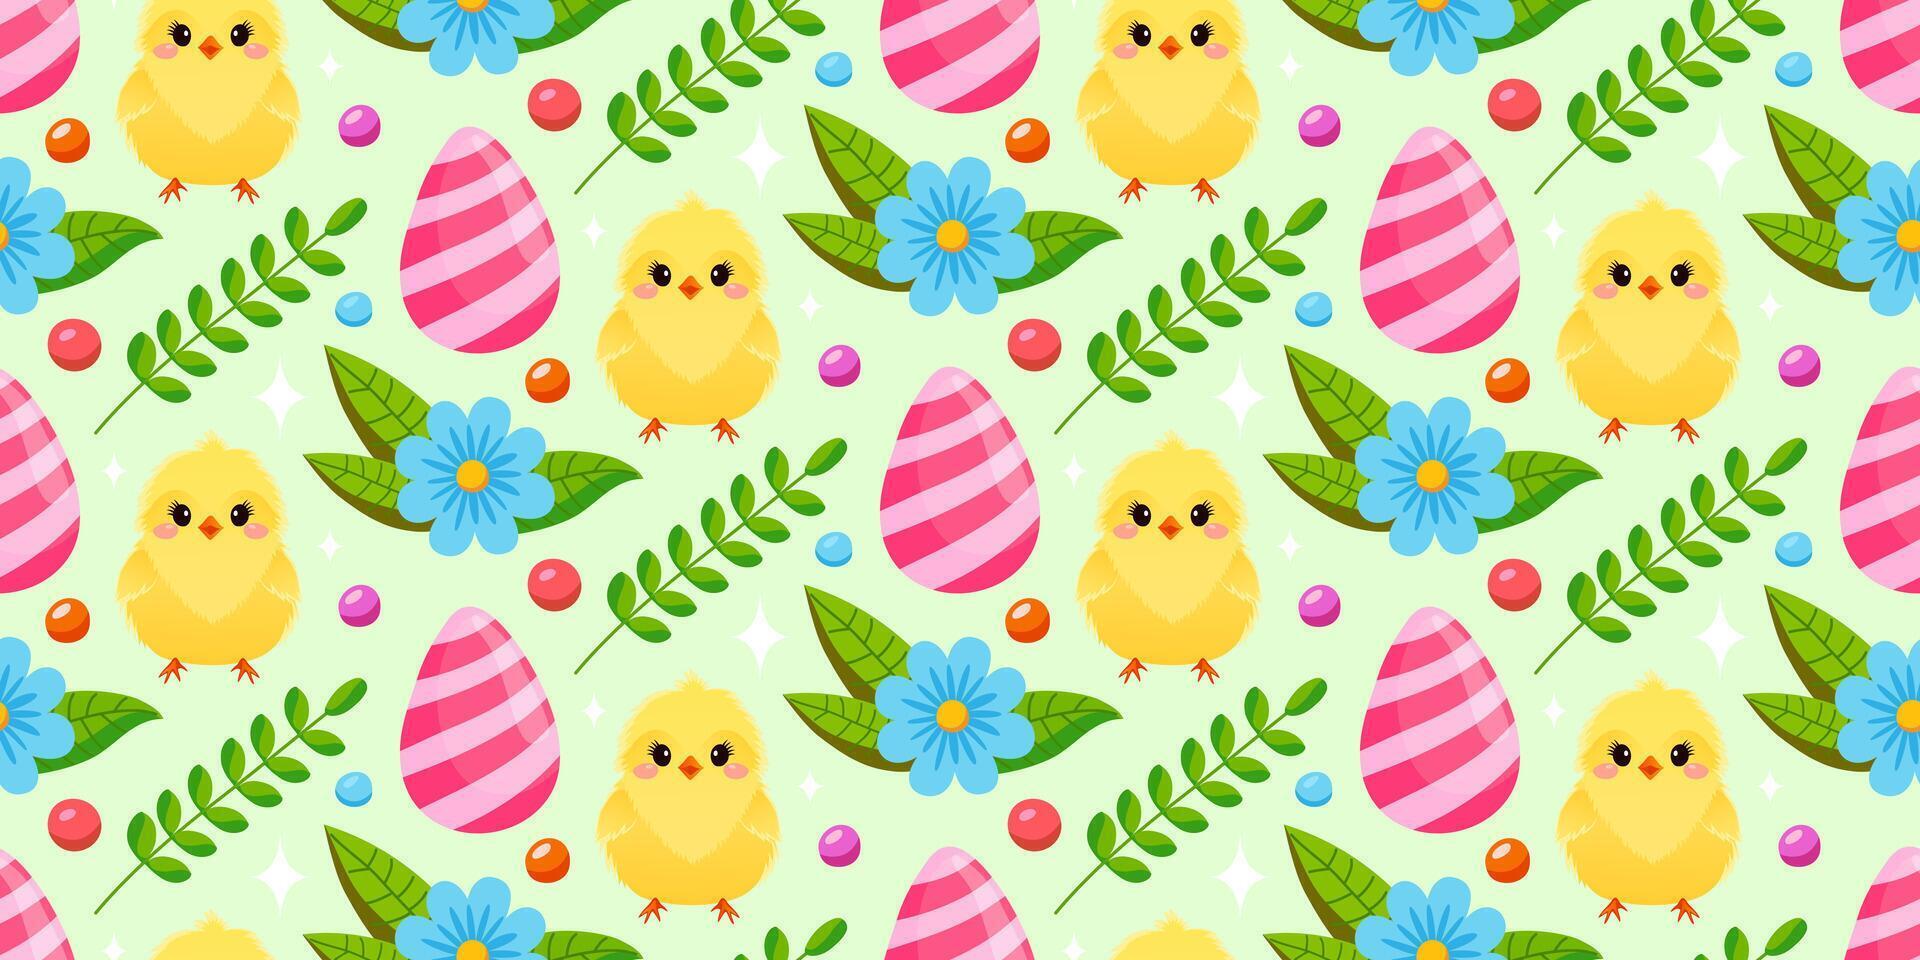 Cute floral Easter pattern with yellow chickens and colored eggs. The cheerful Easter design for background, digital paper, wallpaper, fabric. Seamless pattern. Vector illustration.